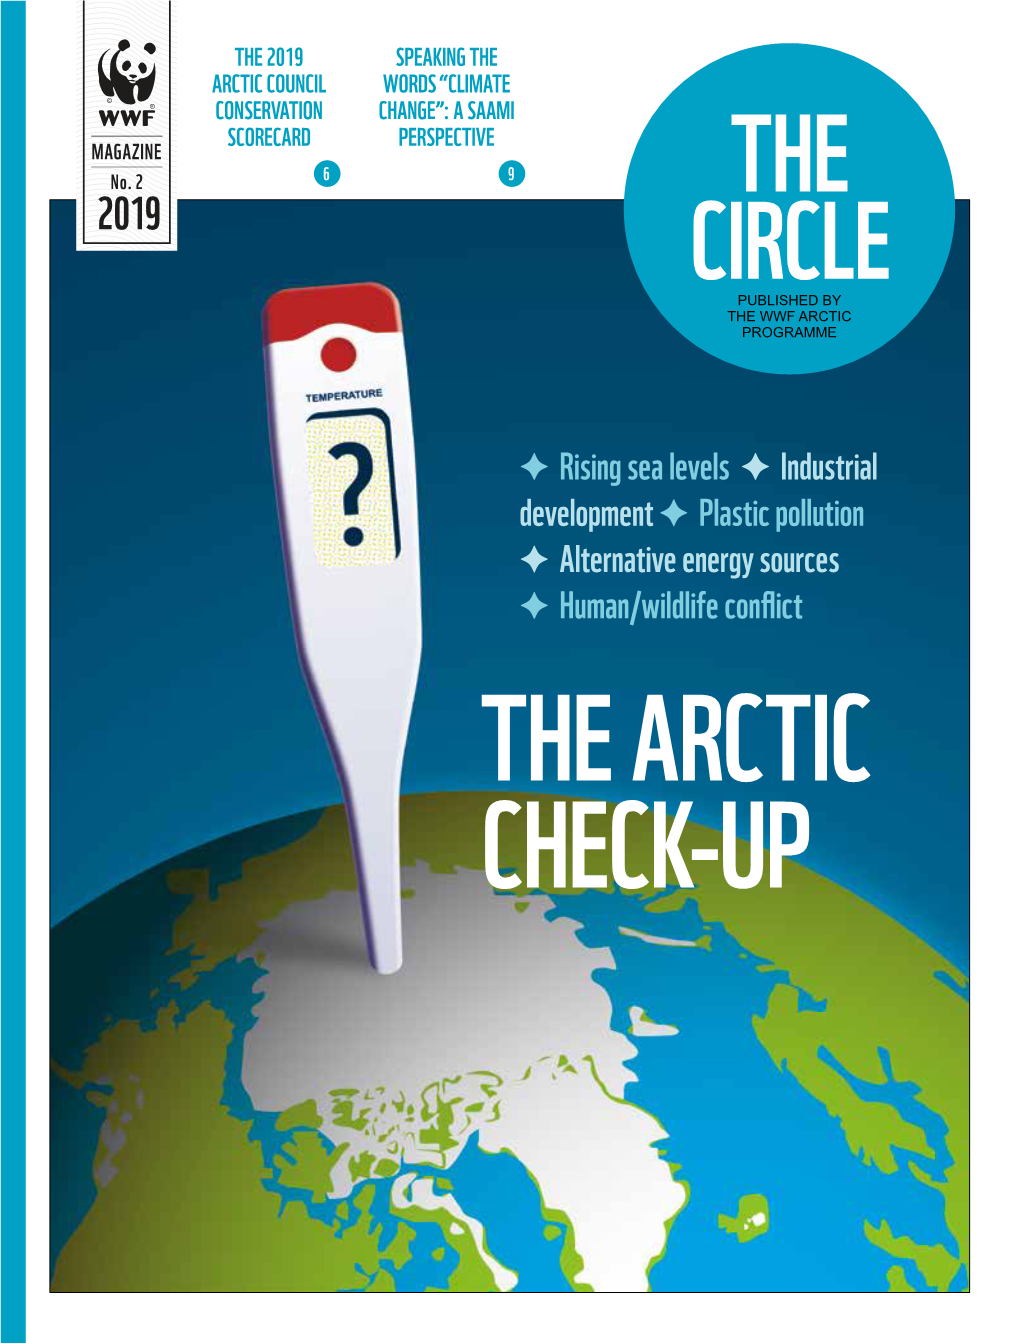 Download This Issue of the Circle